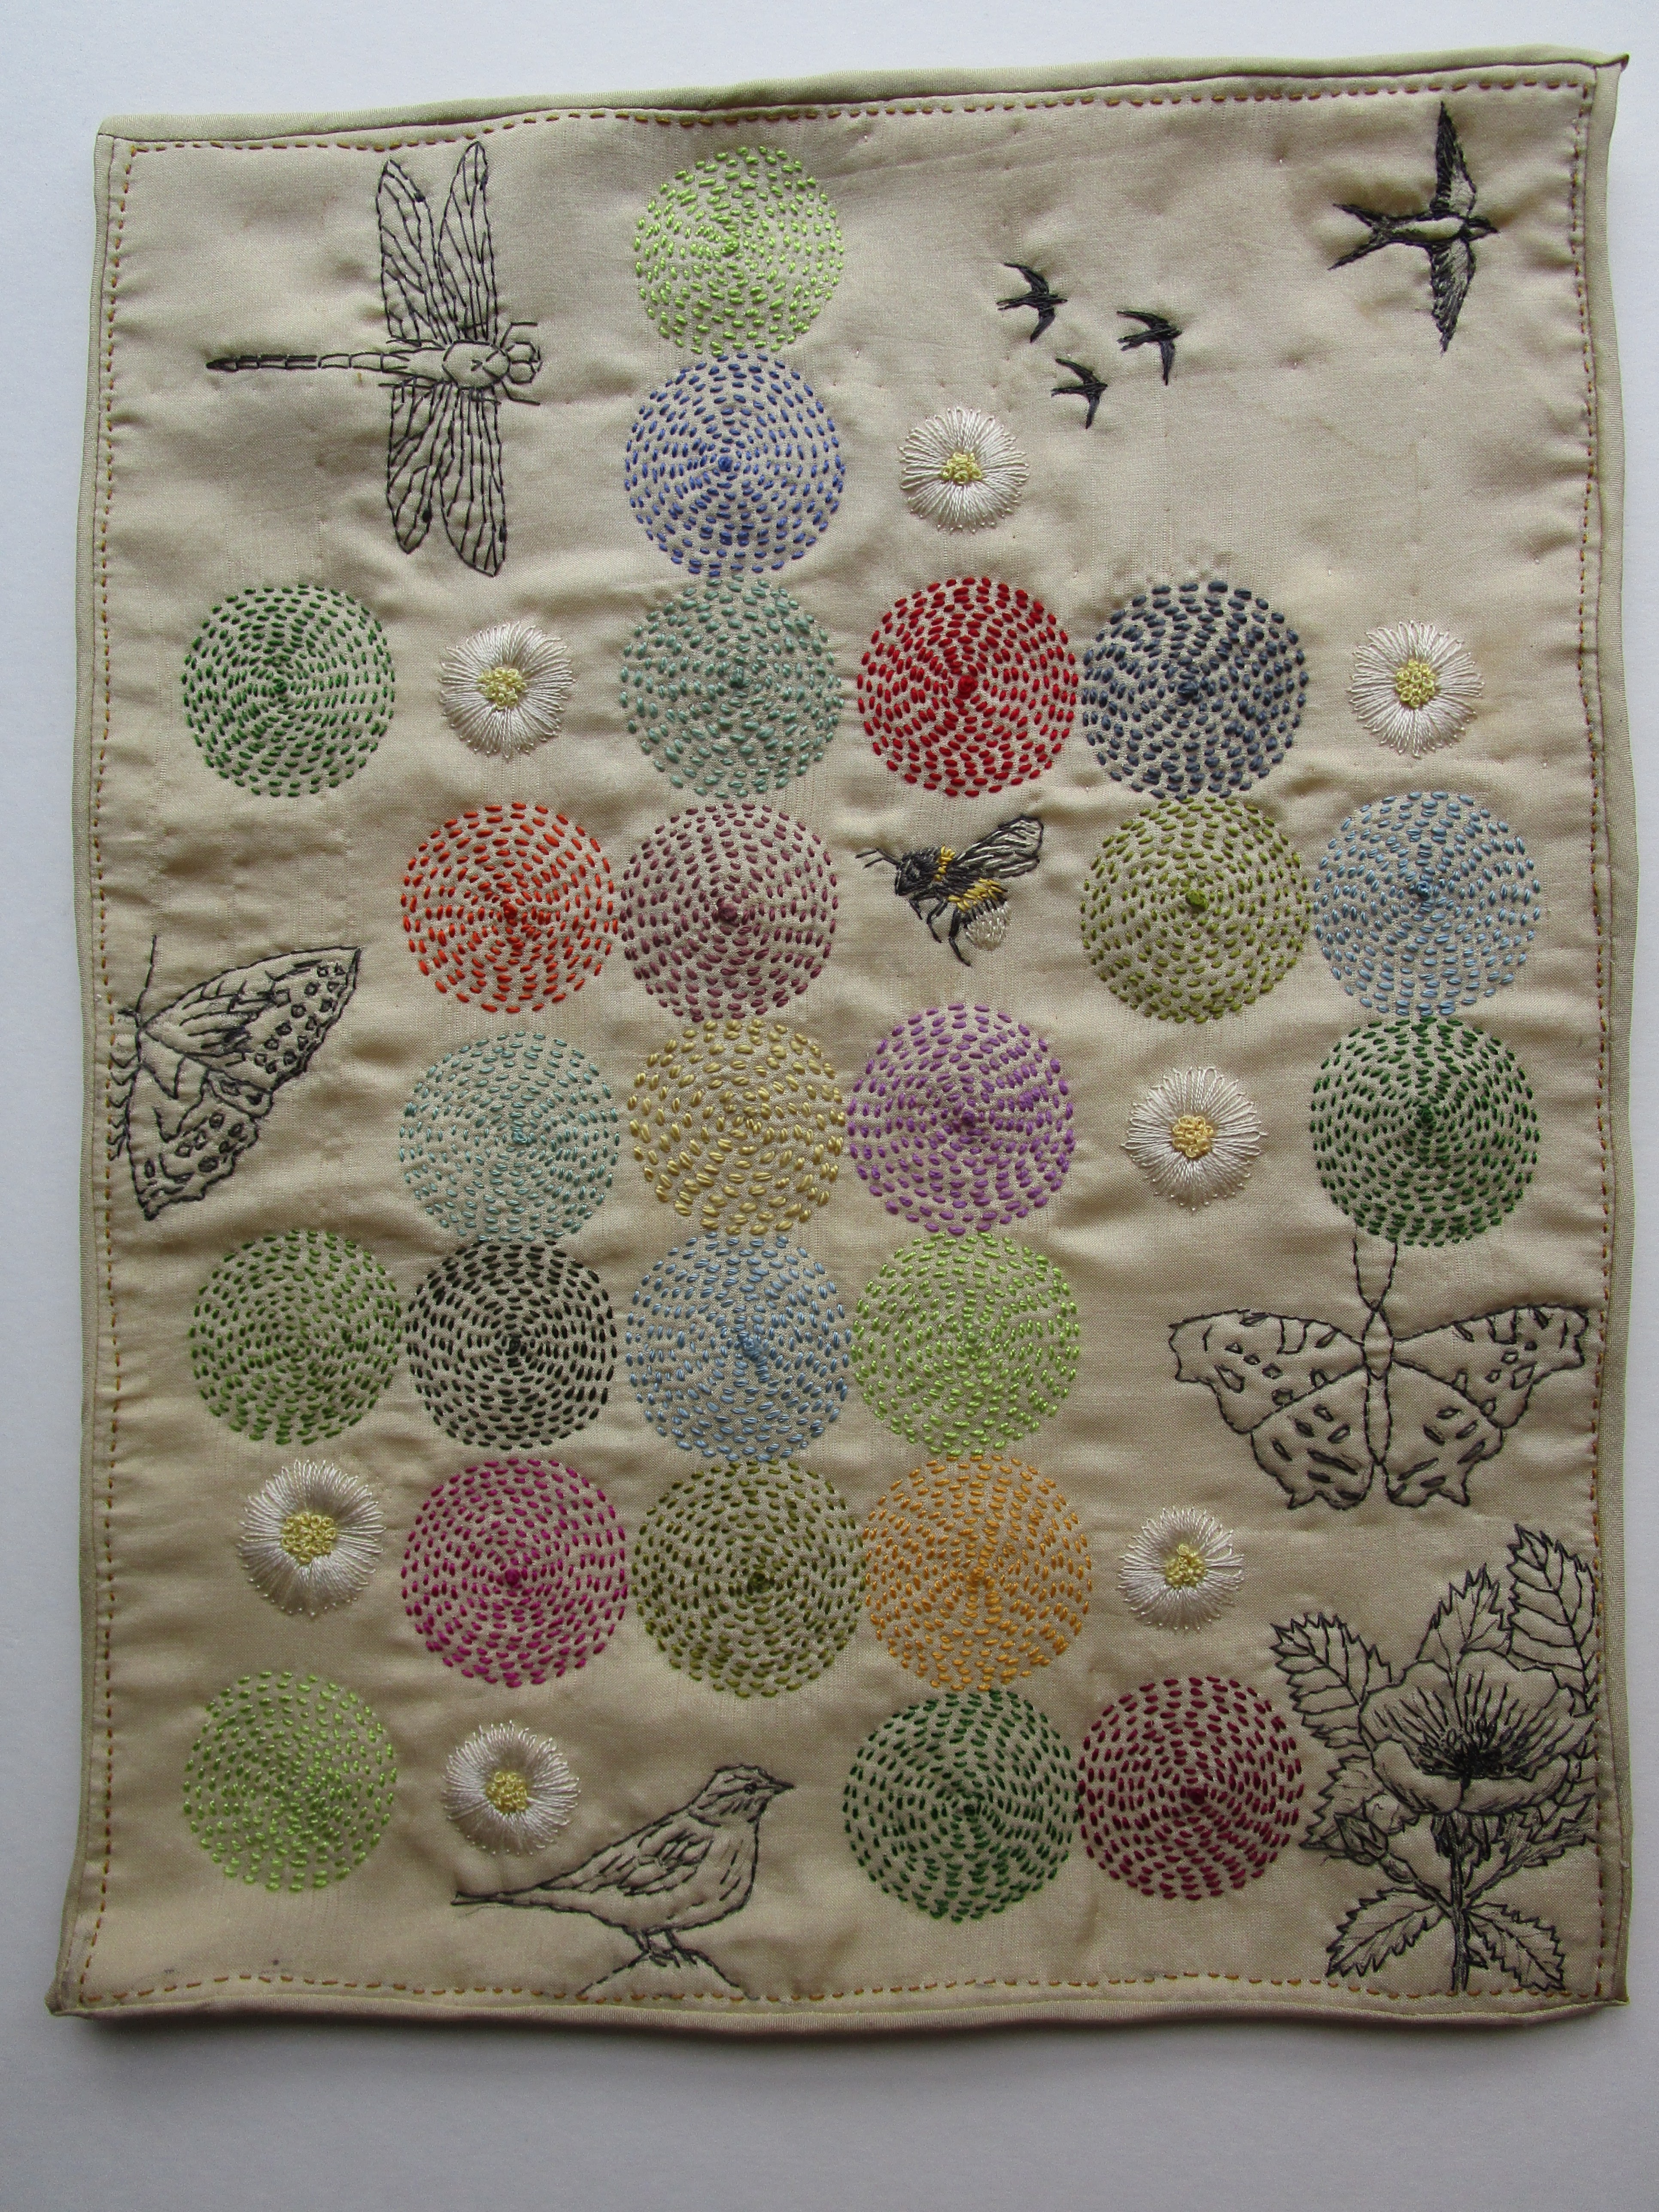 Louise Watson - Textile Artist: Summer cloth - slow stitching and